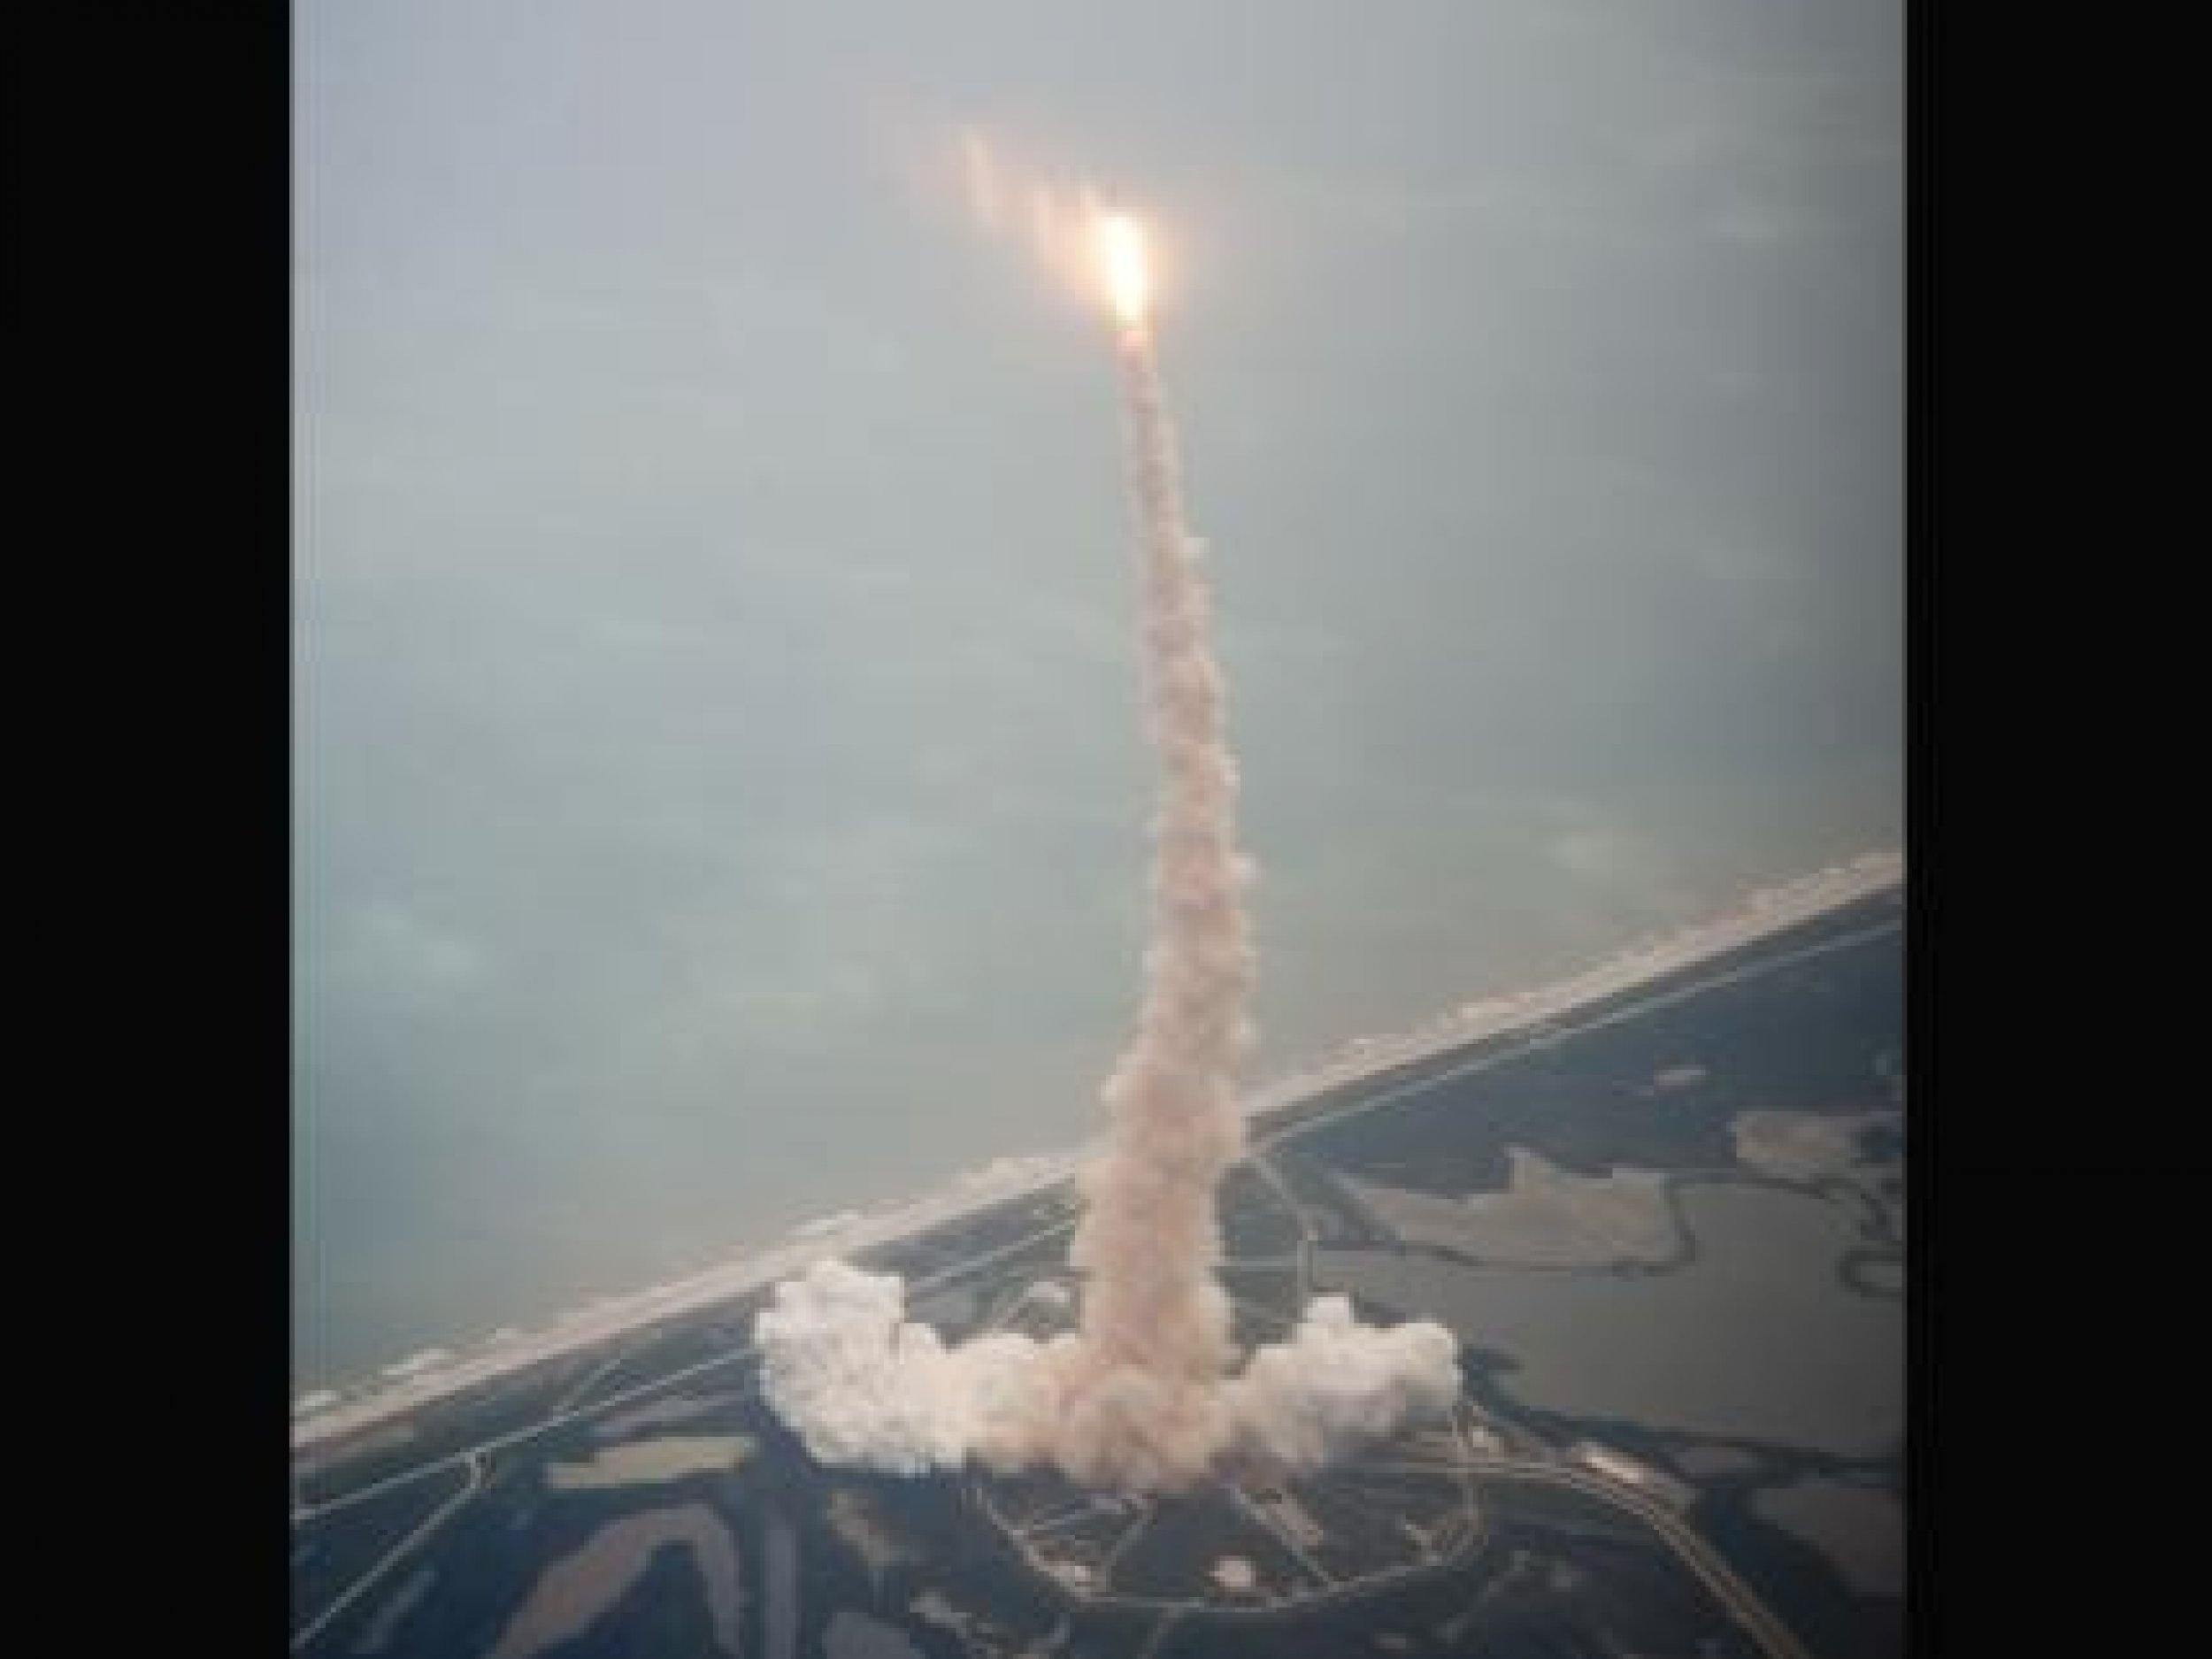 Images taken by Space Shuttle Atlantis